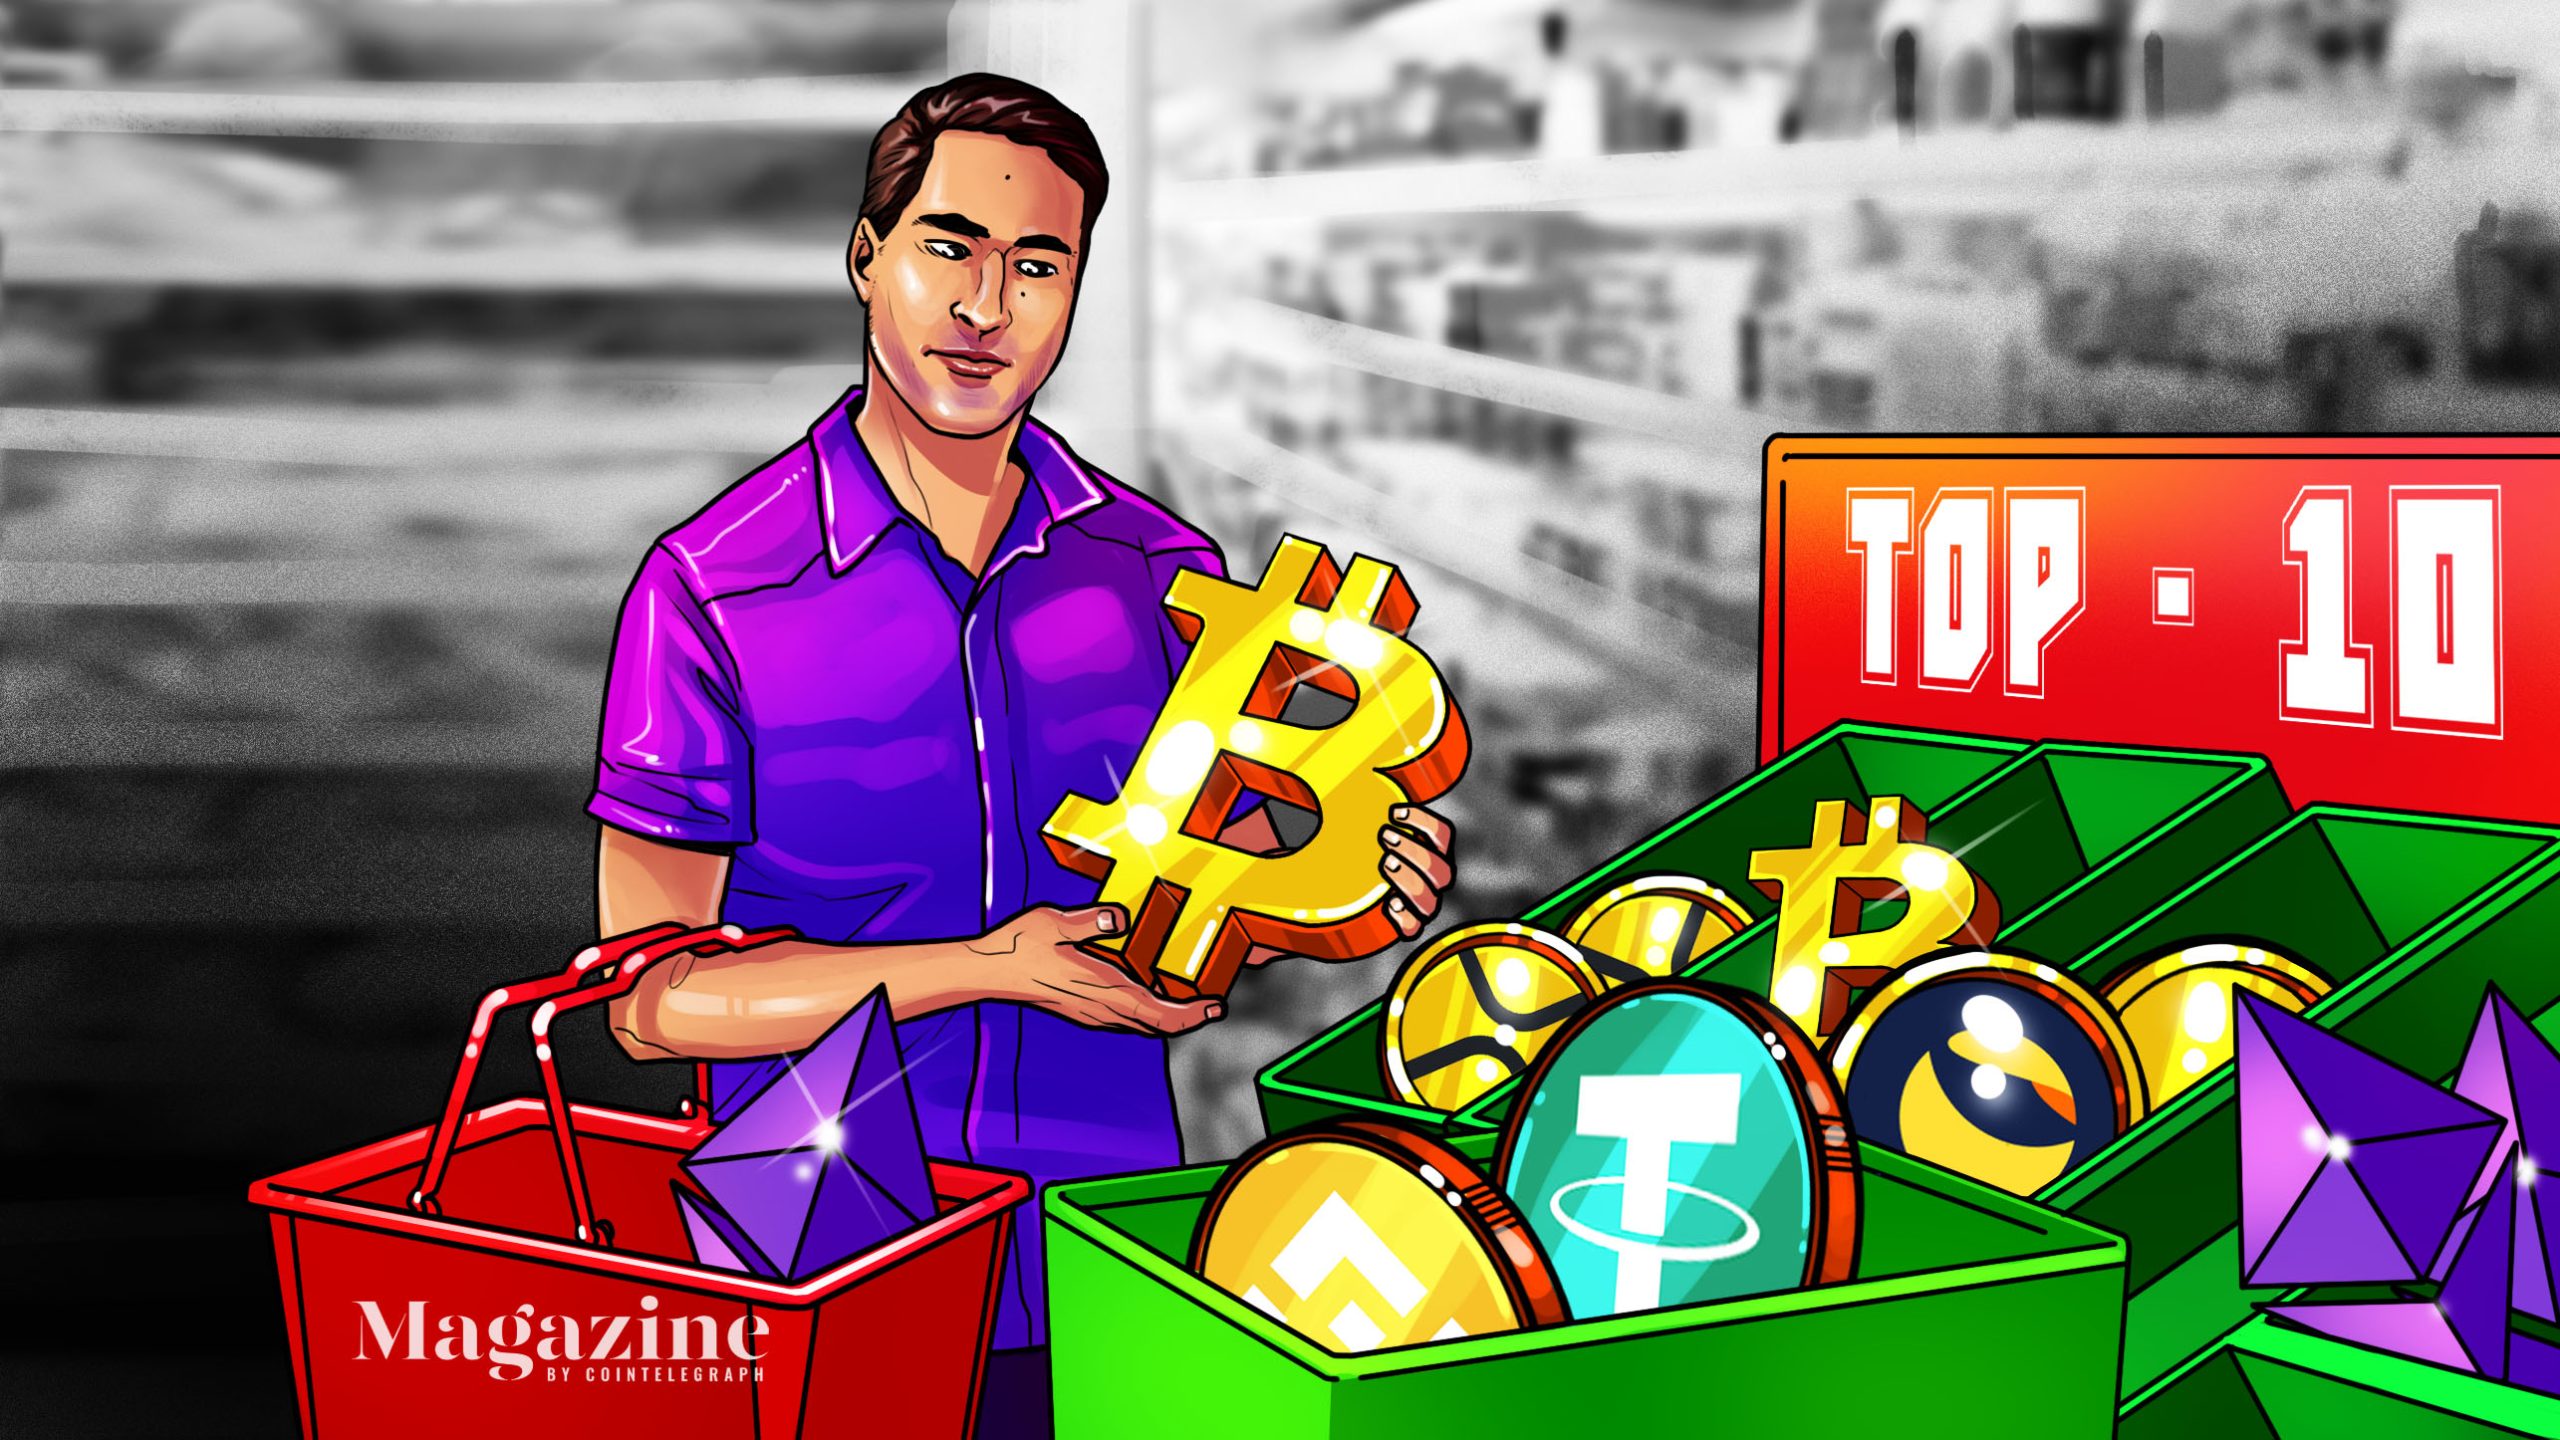 5 years of the ‘Top 10 Cryptos’ experiment and the lessons learned – Cointelegraph Magazine